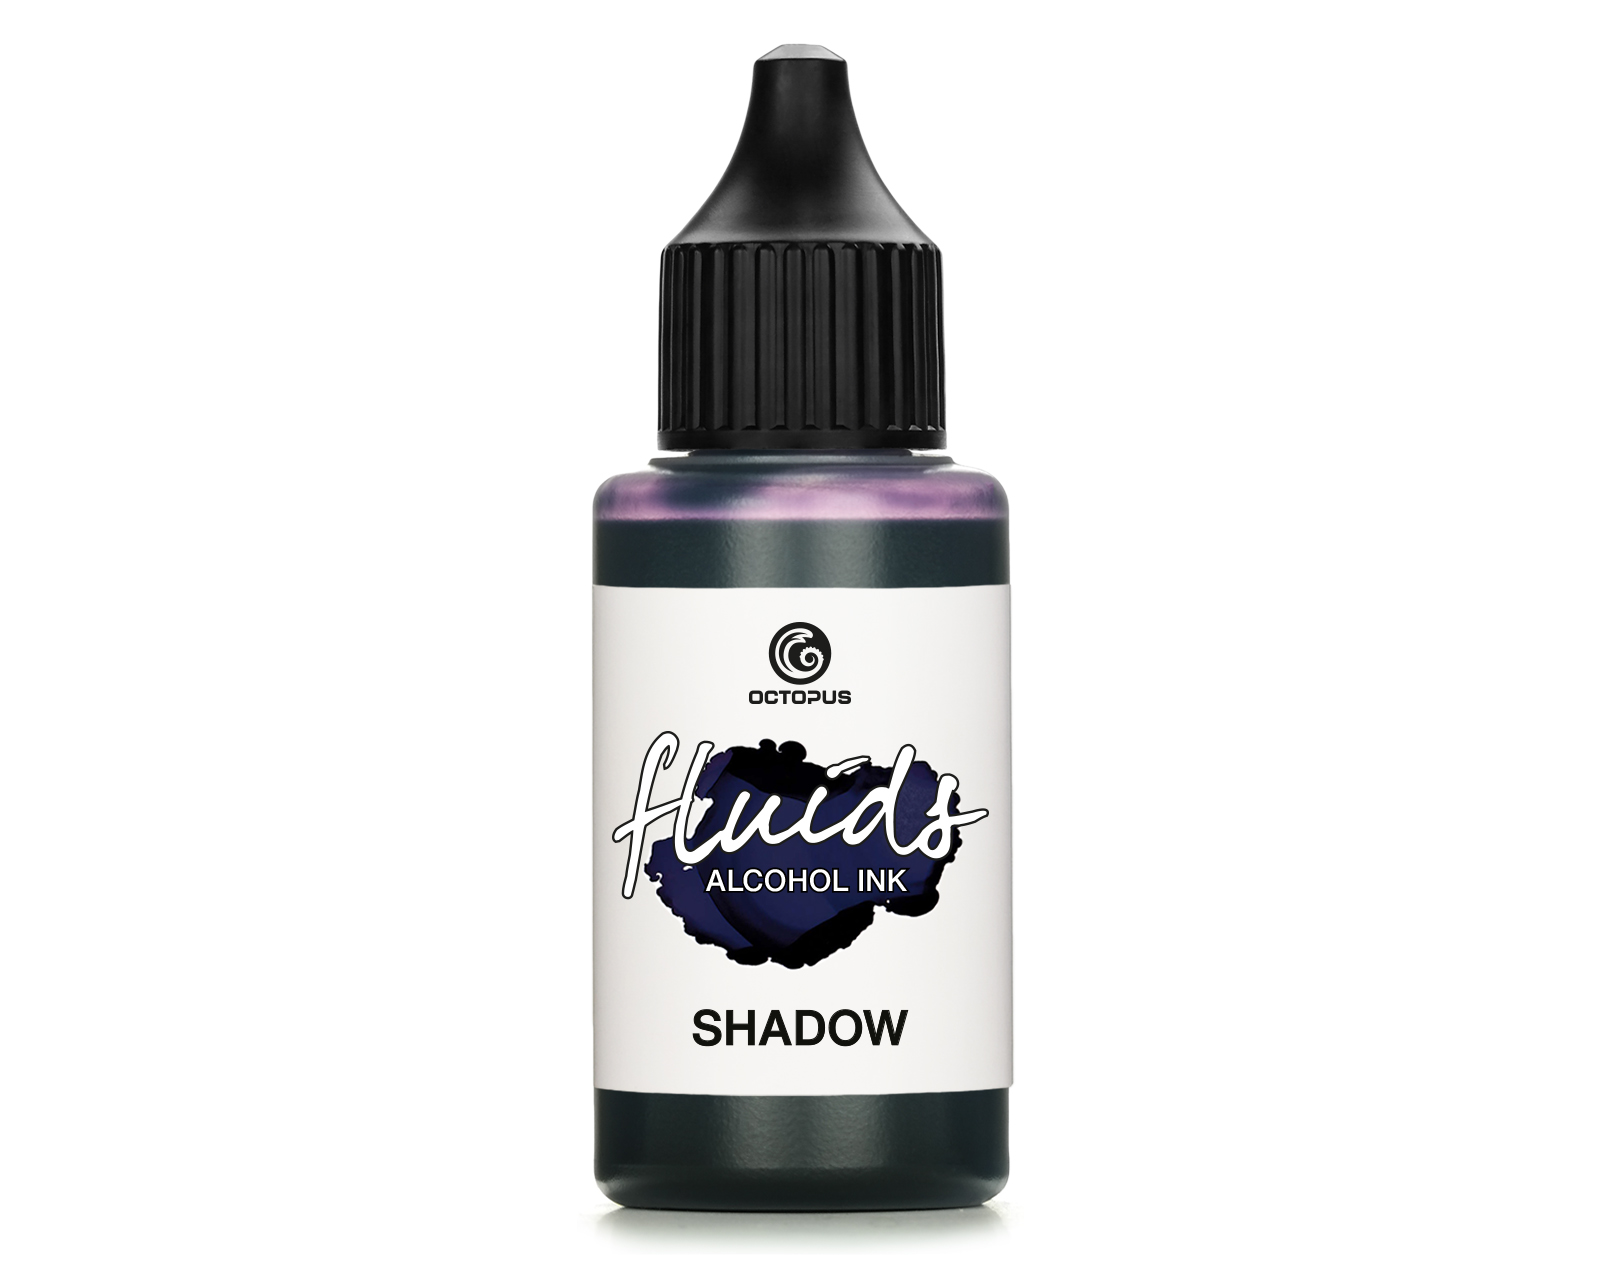 Fluids Alcohol Ink SHADOW, Inchiostro ad alcohol per Alcohol Ink Art